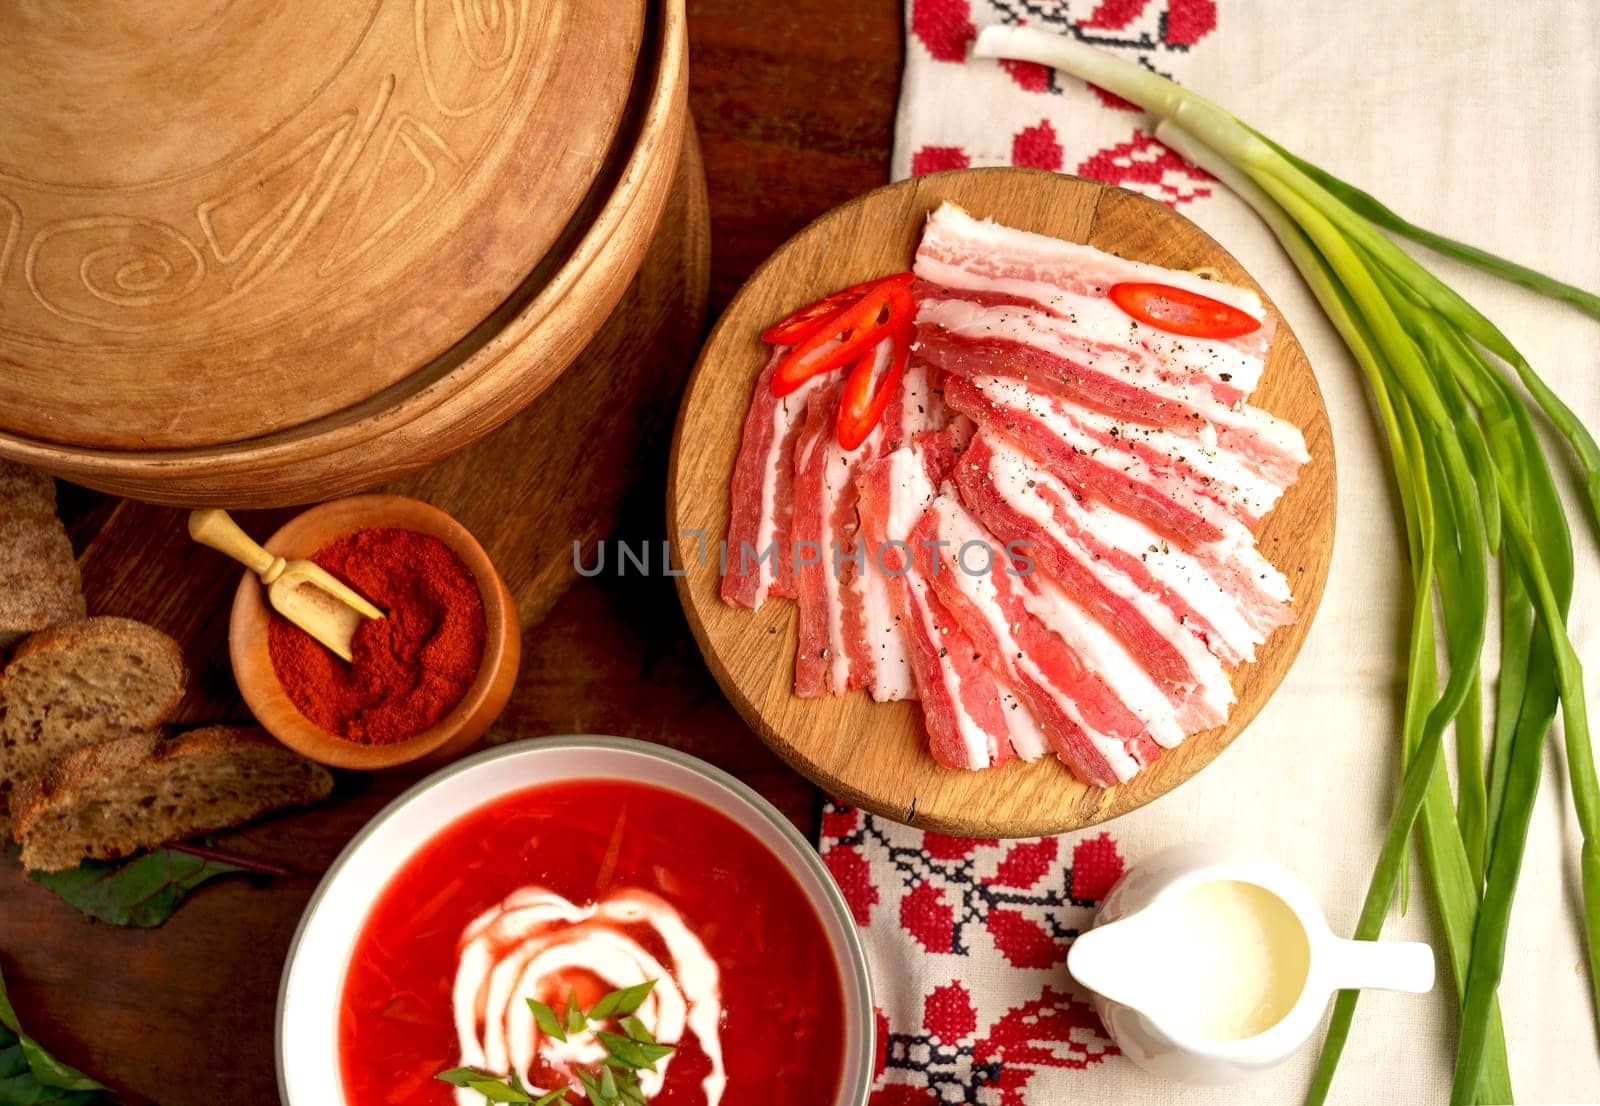 Traditional Ukrainian borsht, red vegetable soup or borscht with smetana on wooden background. Slavic dish with cabbage, beets, tomatoes Traditional Ukrainian towel along with garlic, bread and salt. Top view of a wooden tray on a black background on which lies Ukrainian food with spices by aprilphoto